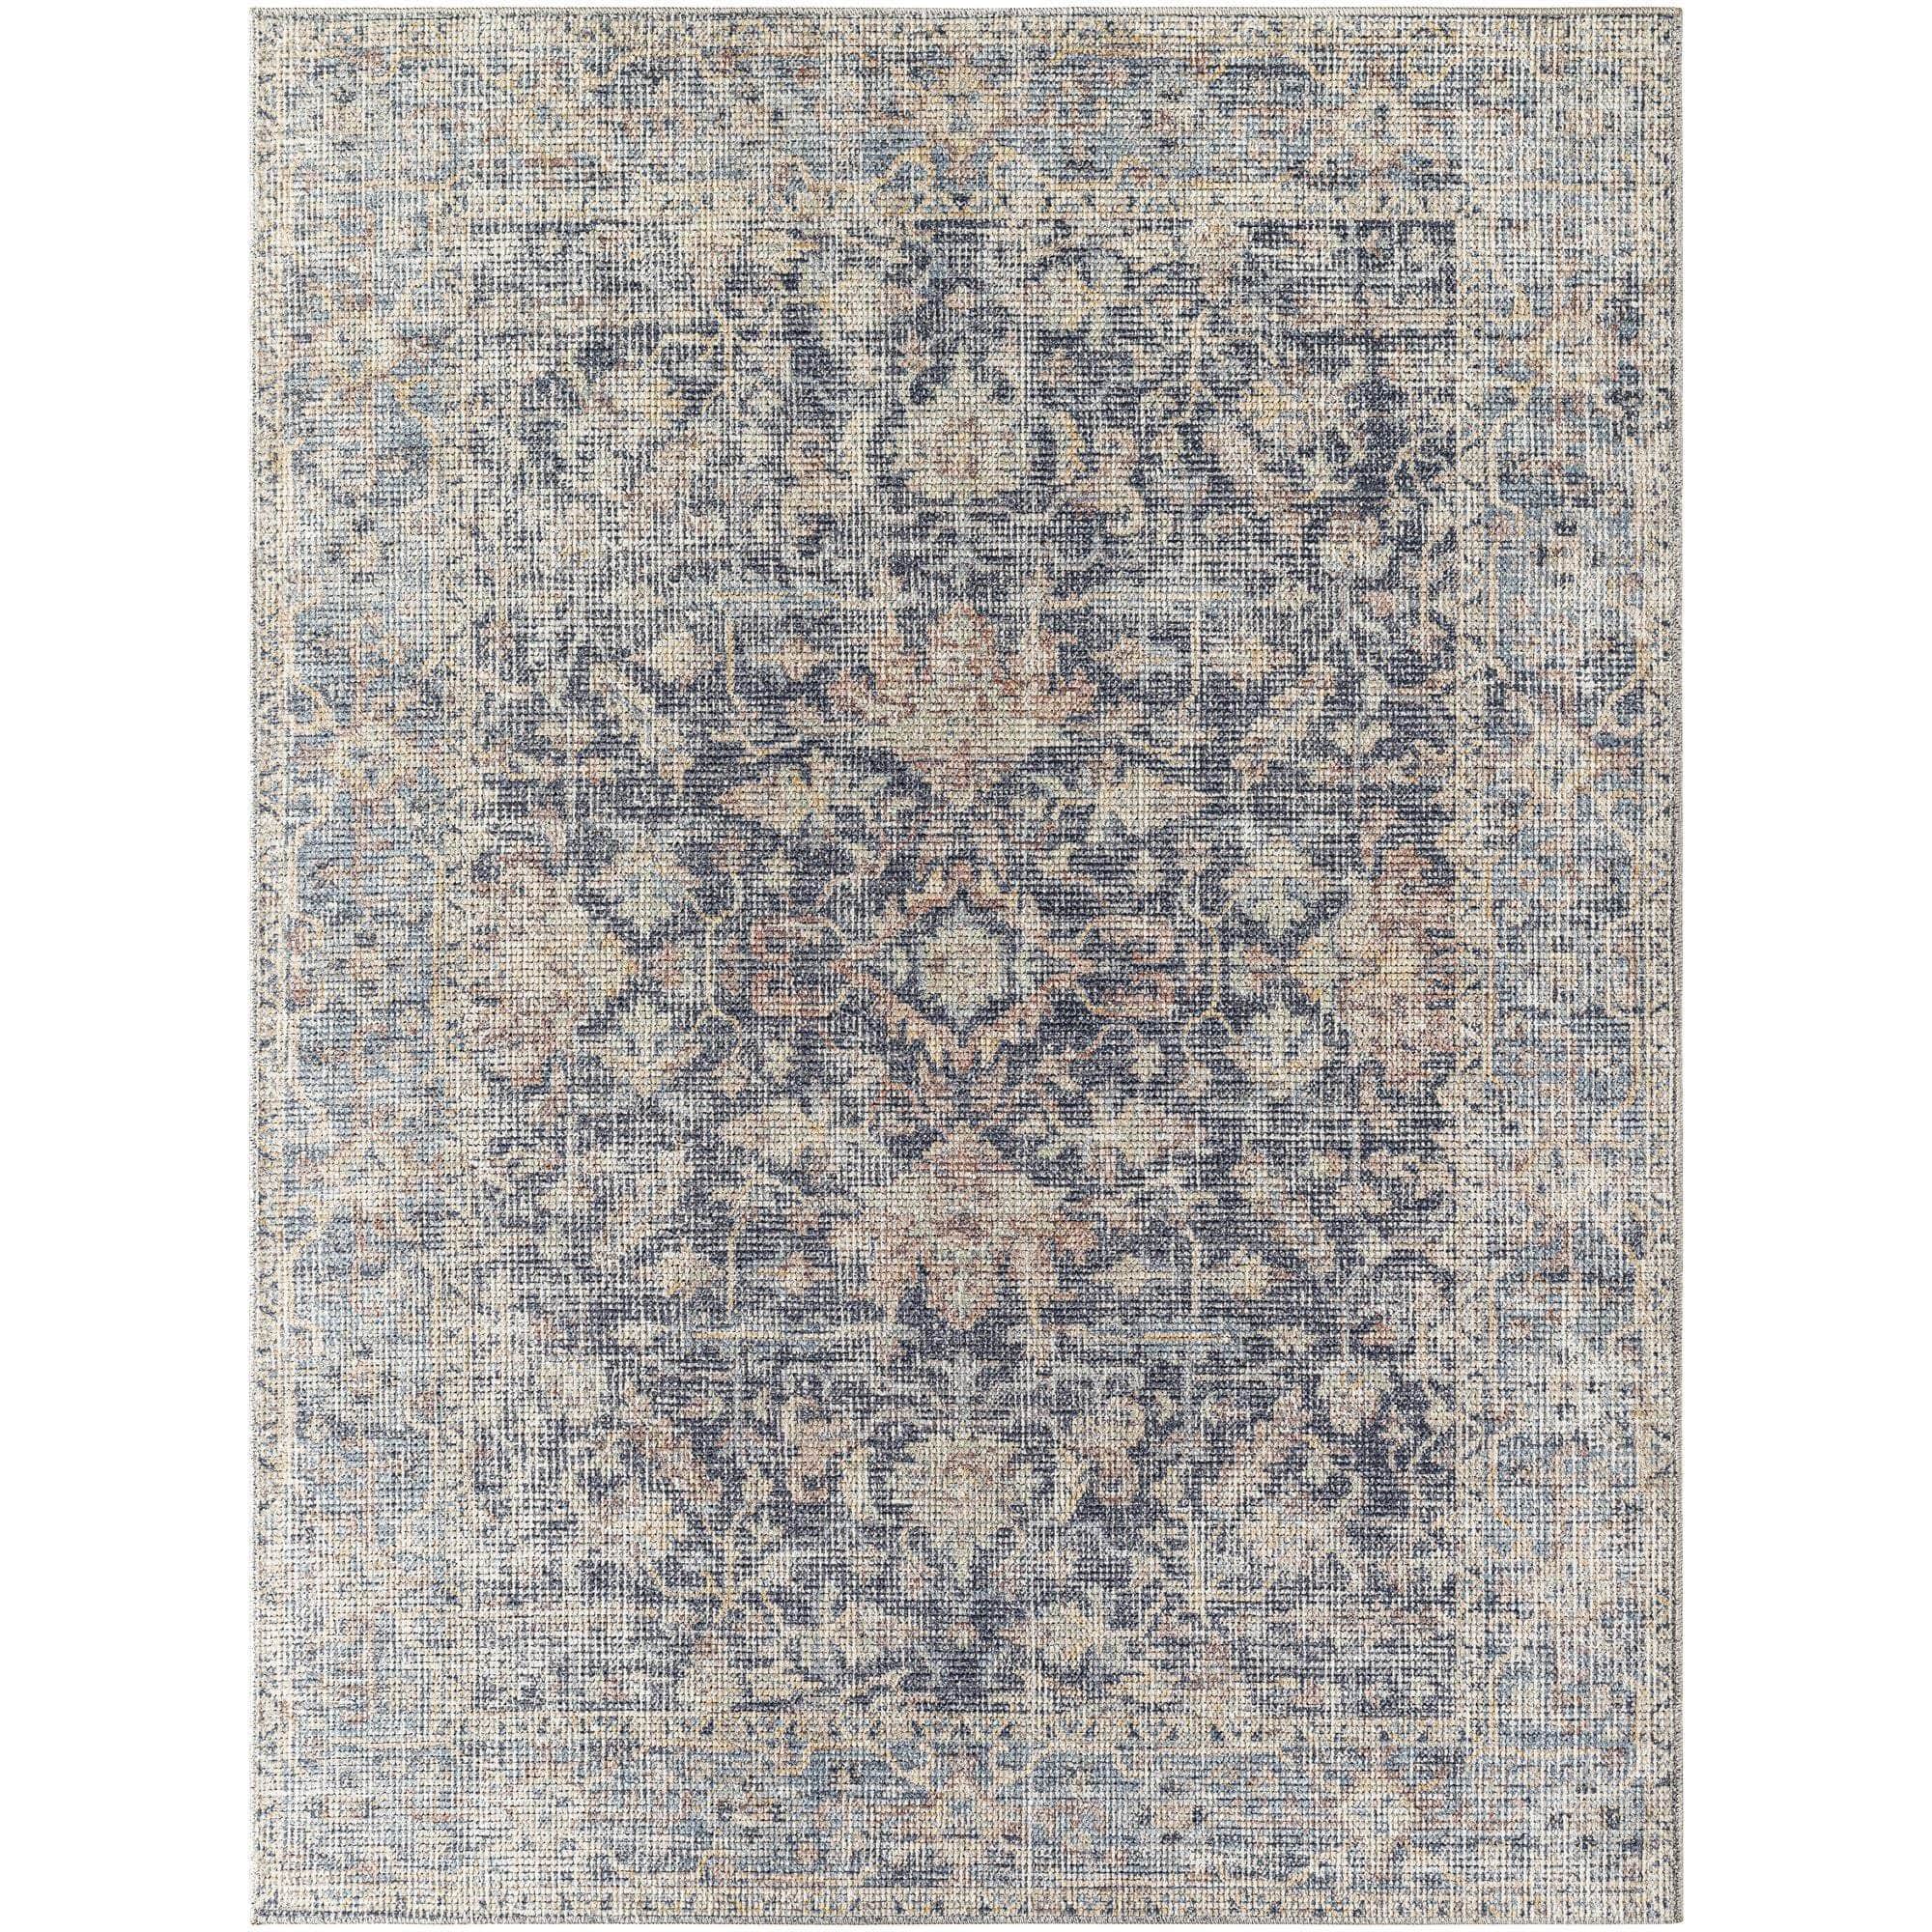 Machine Woven PNWOL-2304 Charcoal, Sky Blue, Amber, Seafoam, Light Brown, Gray Rugs #color_charcoal, sky blue, amber, seafoam, light brown, gray